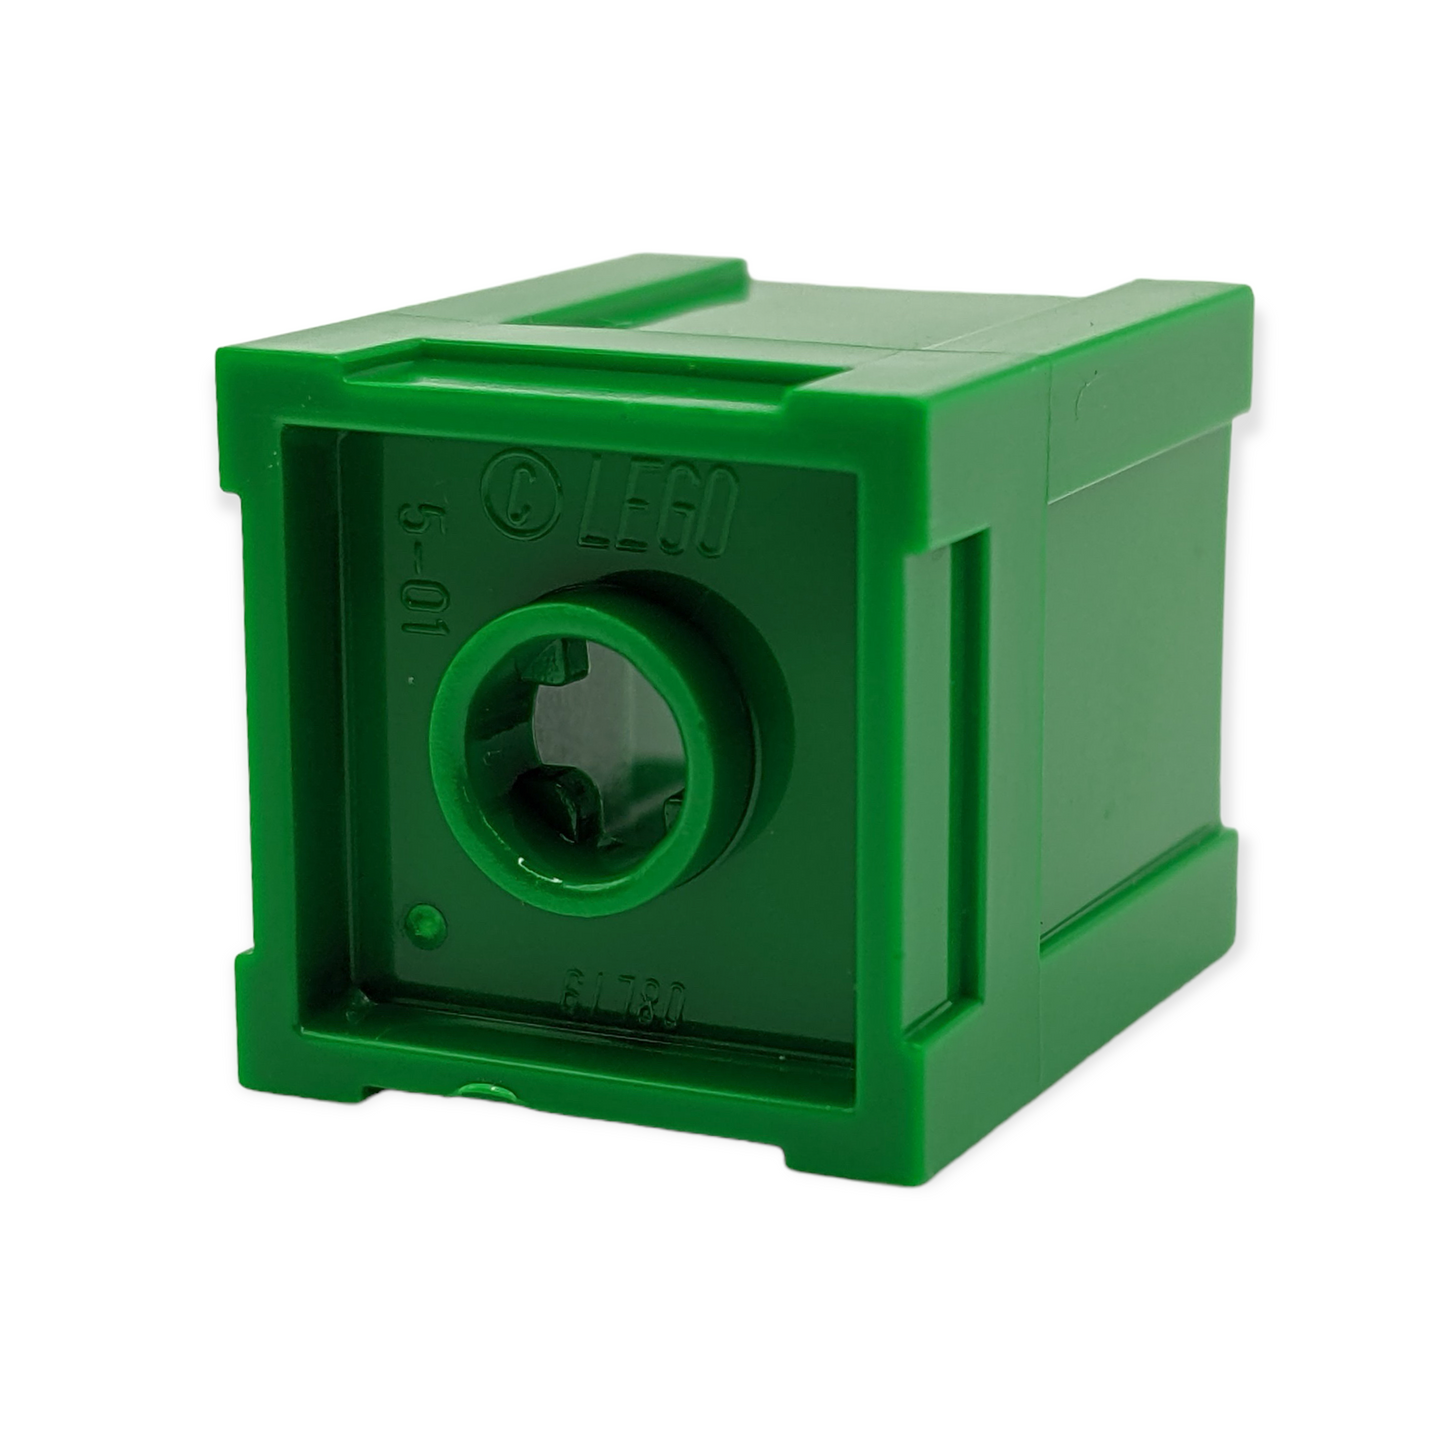 LEGO Container Box 2x2x2 in Green